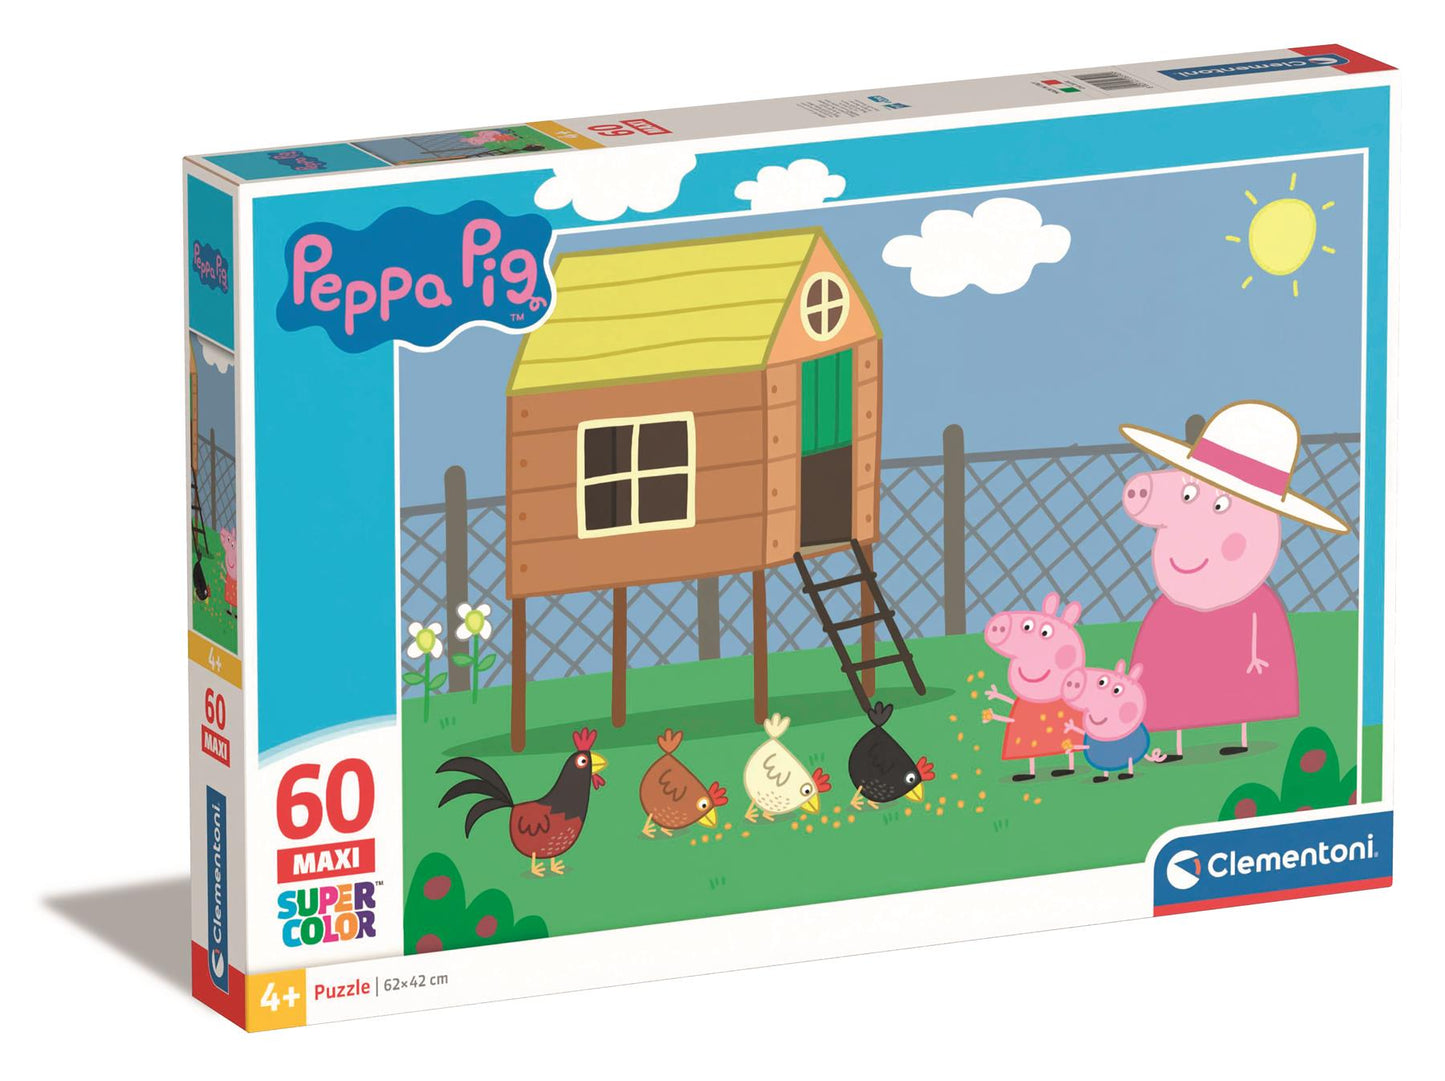 Peppa Pig Maxi Jigsaw Puzzle 60 Pieces